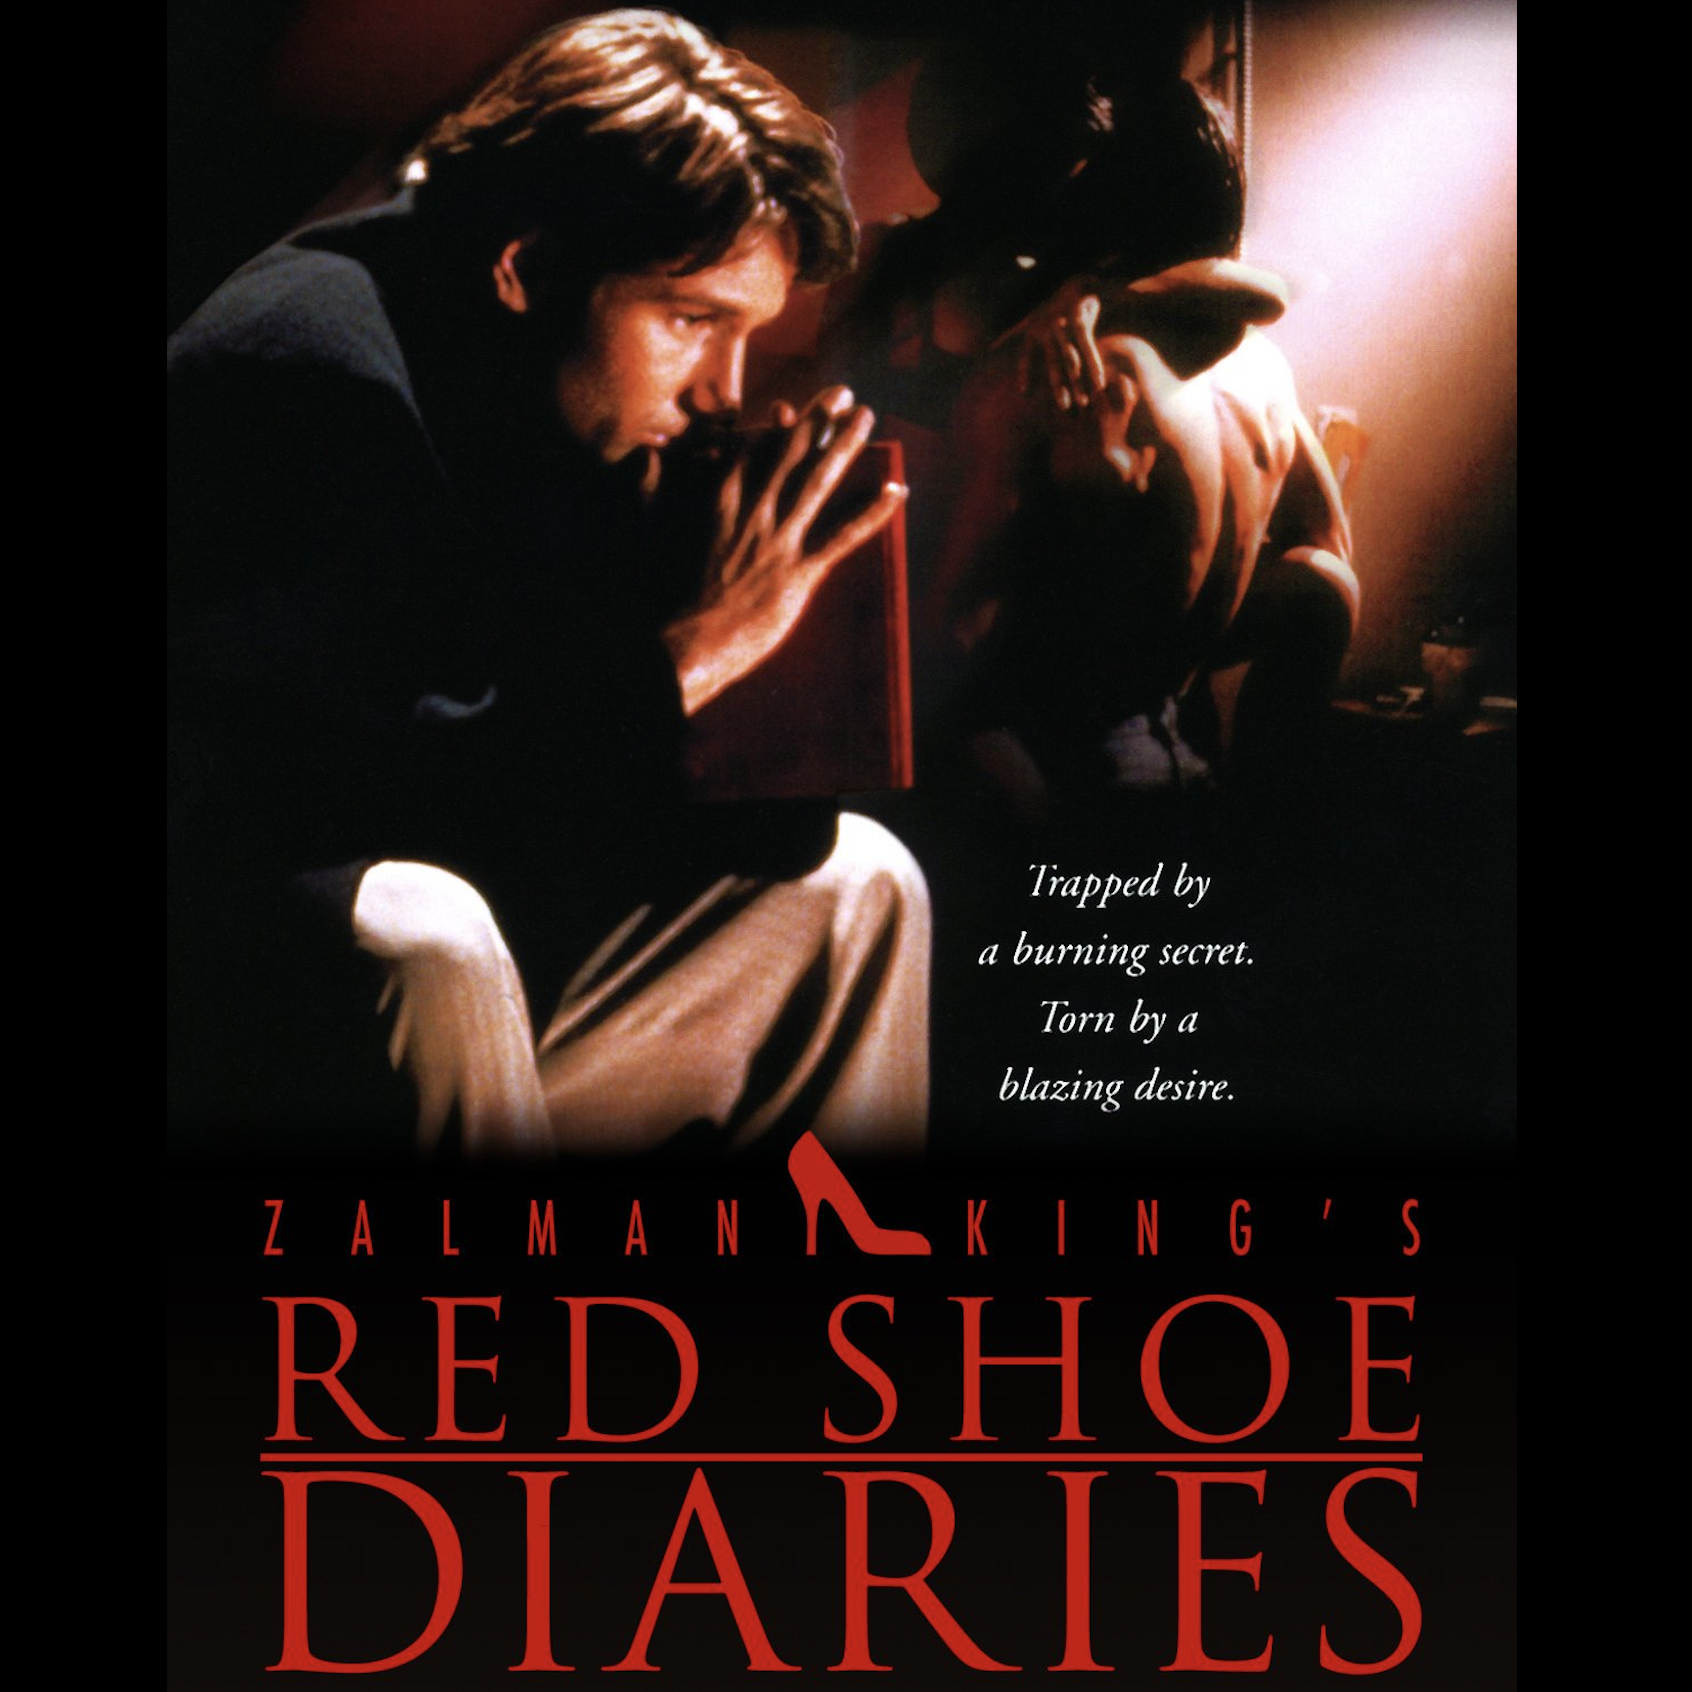 Red Shoe Diaries and Sex on TV in the 90s